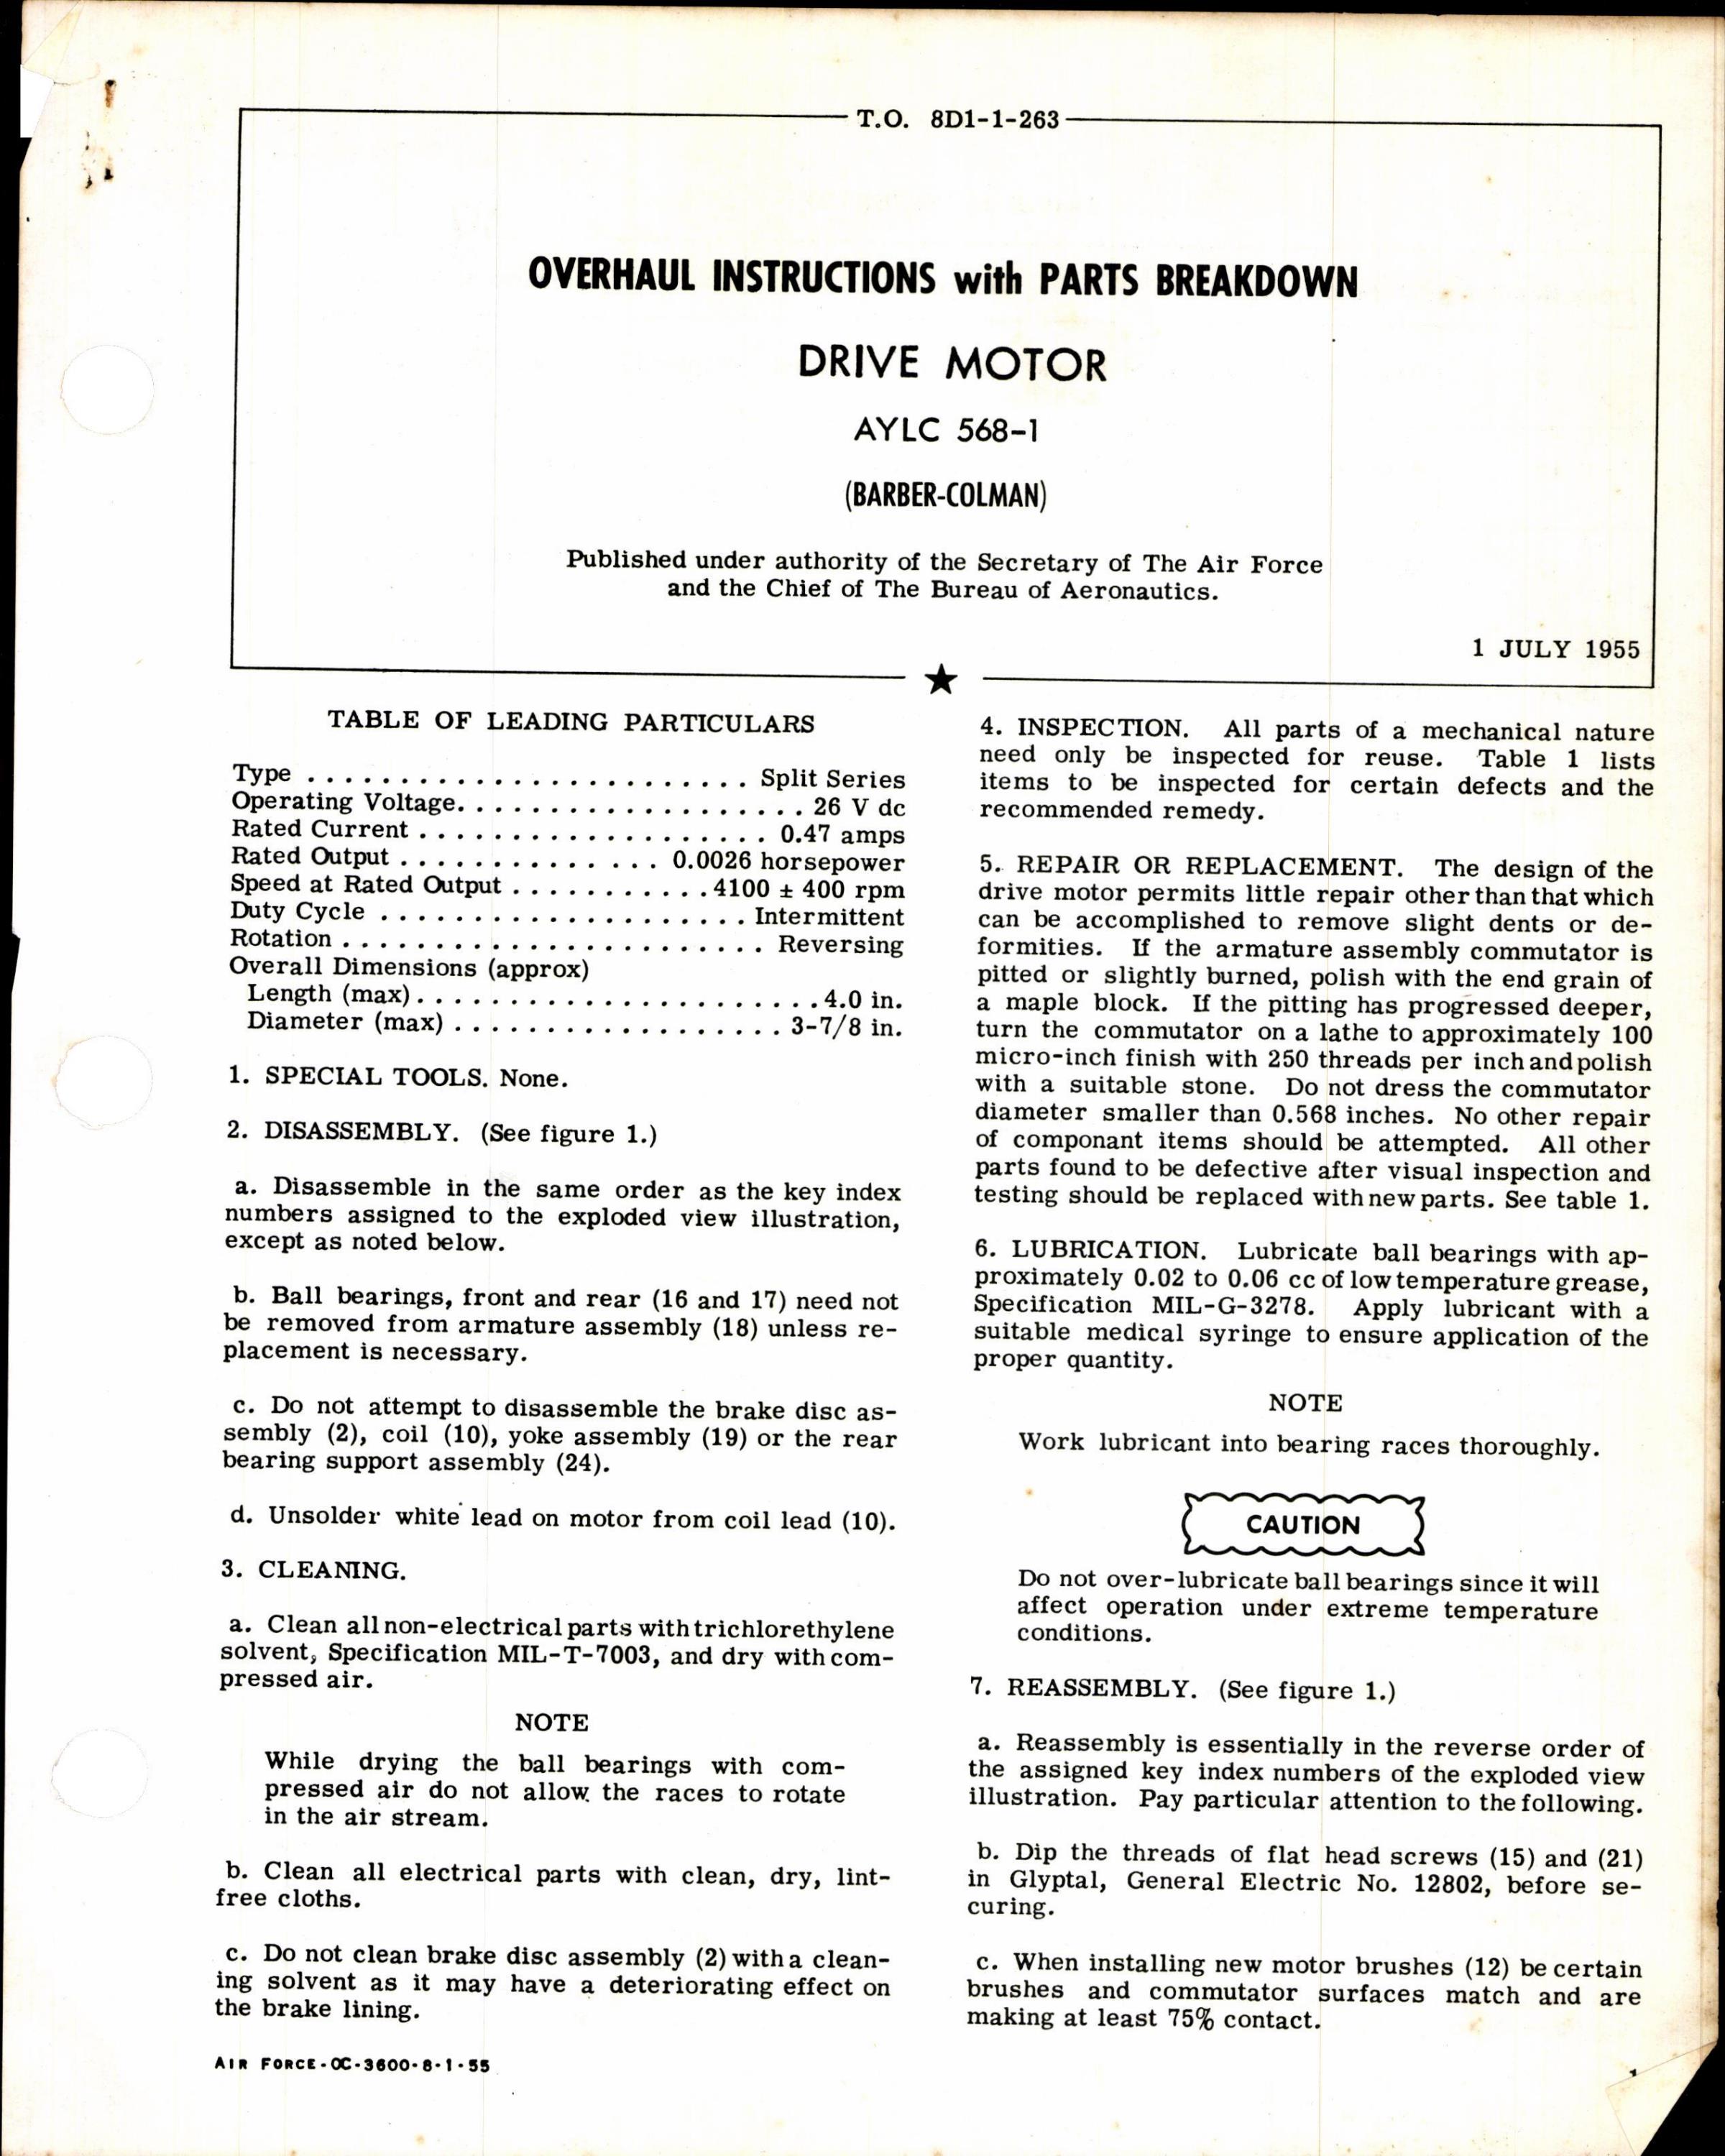 Sample page 1 from AirCorps Library document: Overhaul Instructions with Parts Breakdown for Drive Motor AYLC 568-1